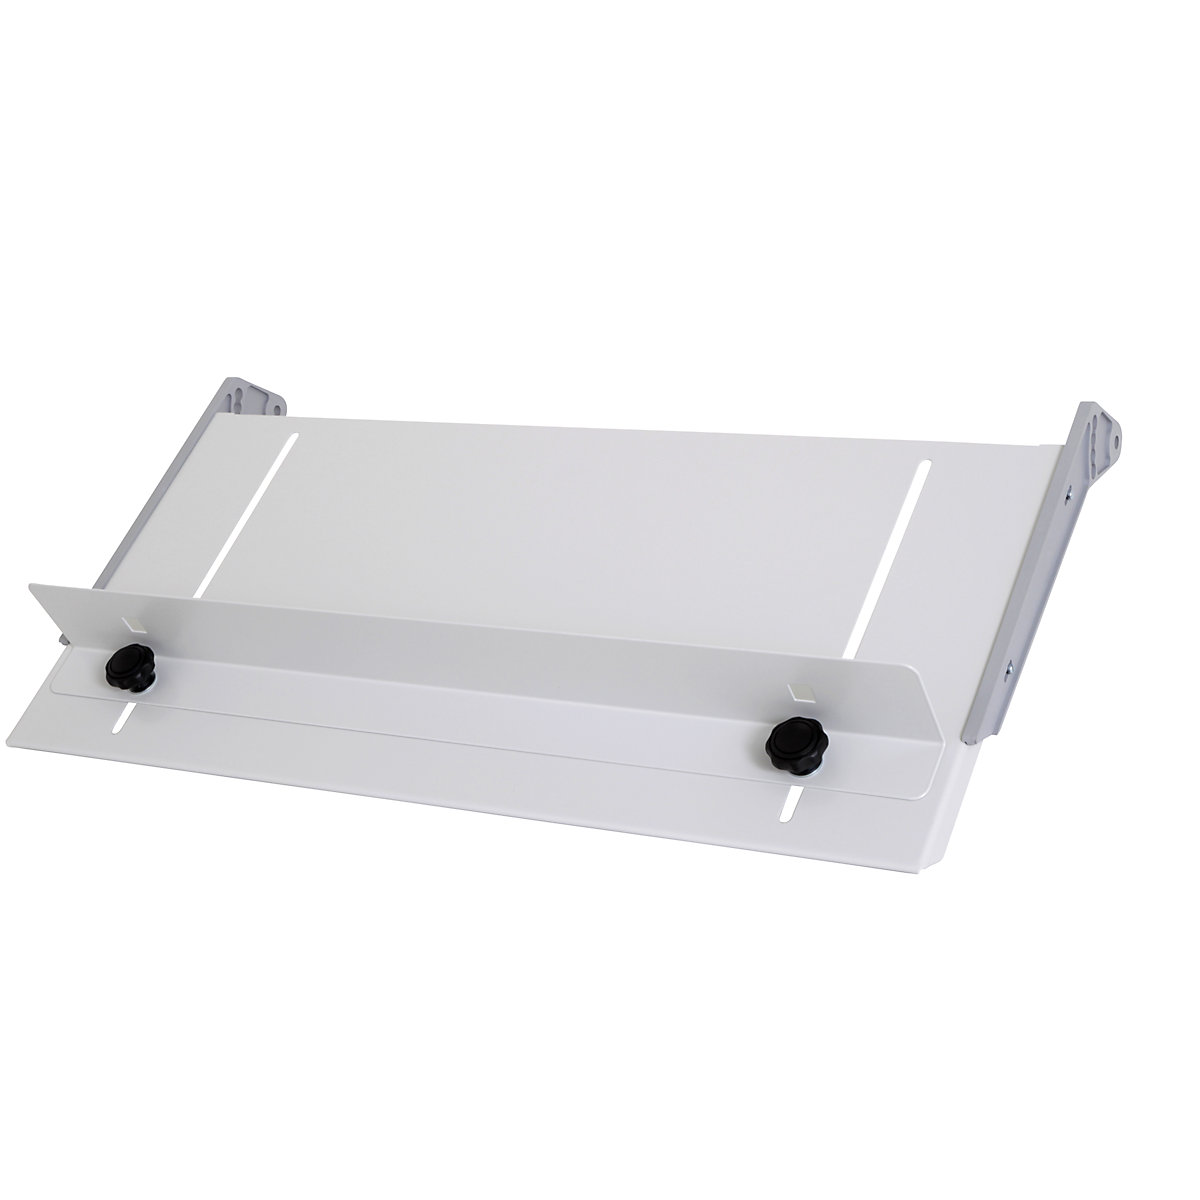 Storage table with stop, for MAGNETA film sealing device, with seal 620 mm-3